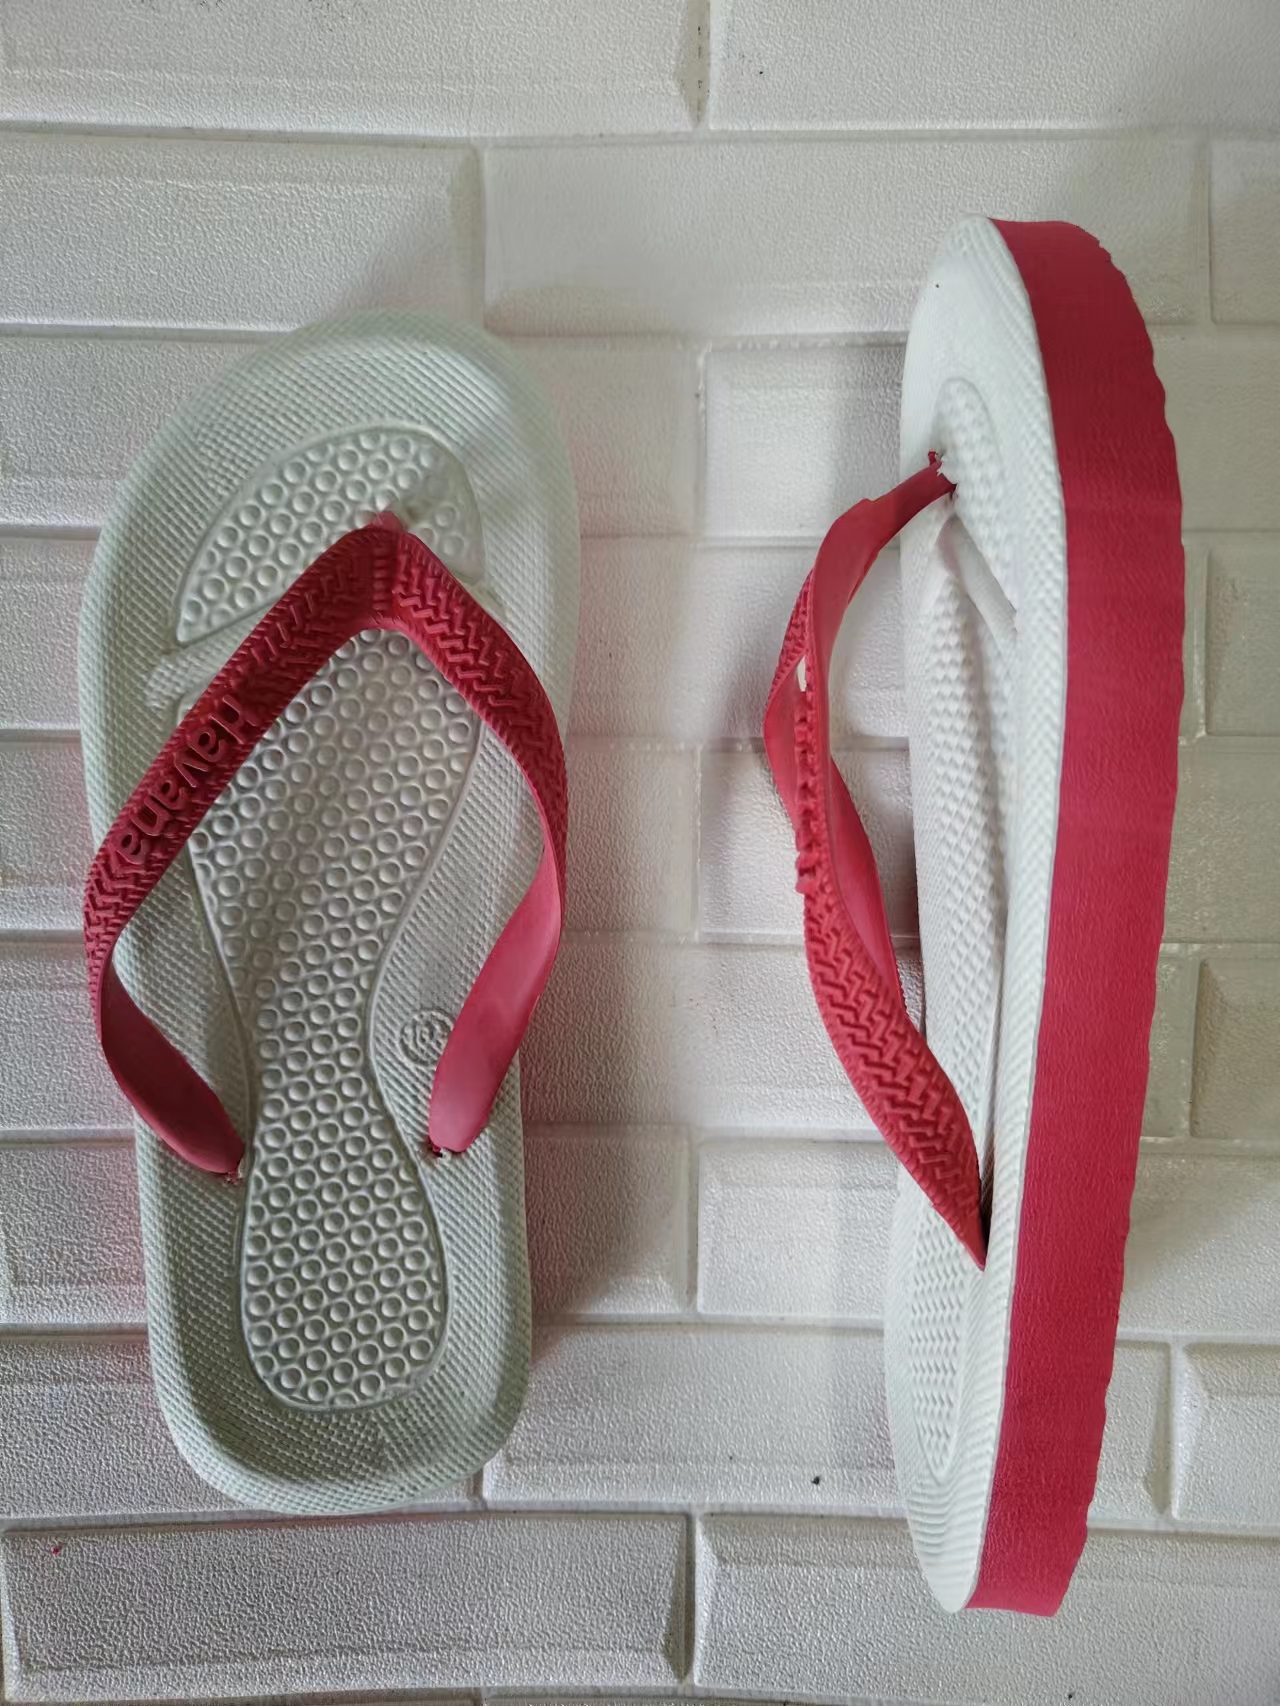 New Tsinelas Pambahay FREELANDER HEALTH SANDAL with New Color Style ...